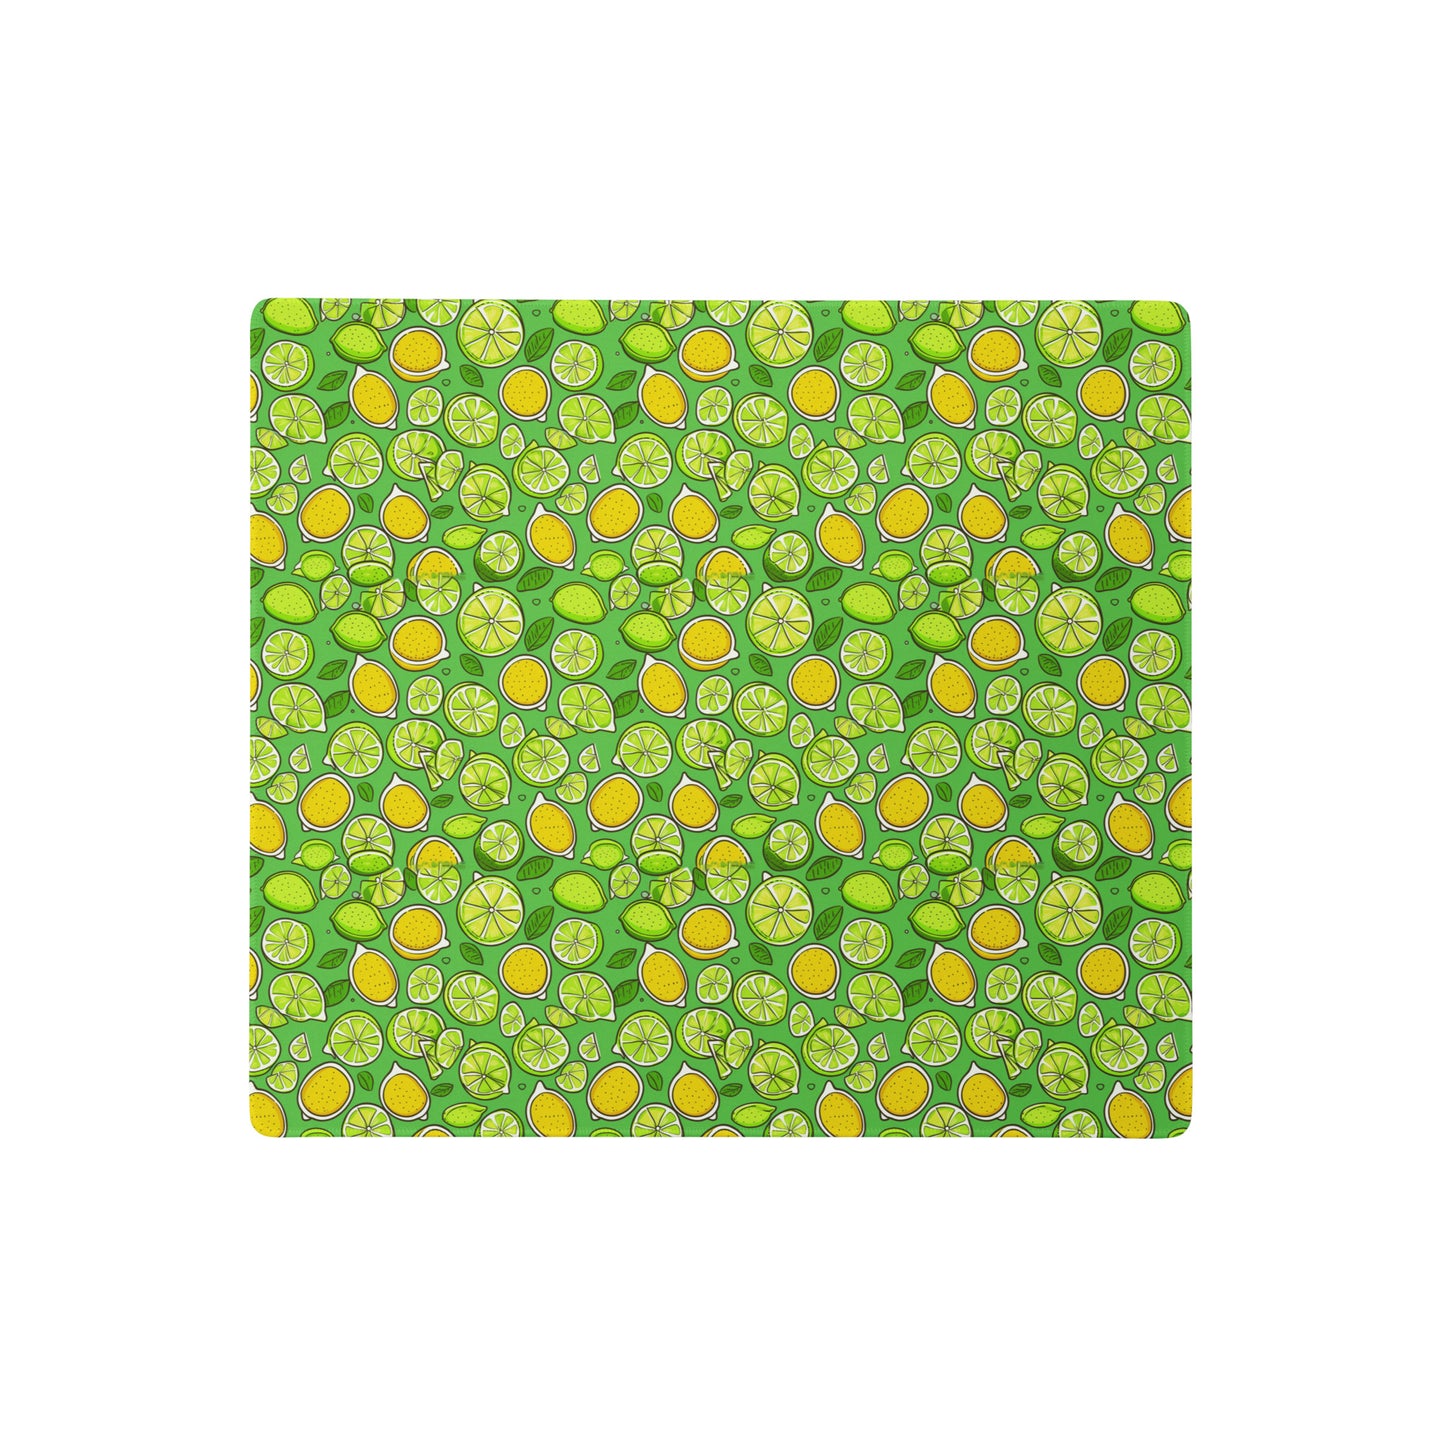 An 18" x 16" gaming desk pad with lemons and limes on a green background.